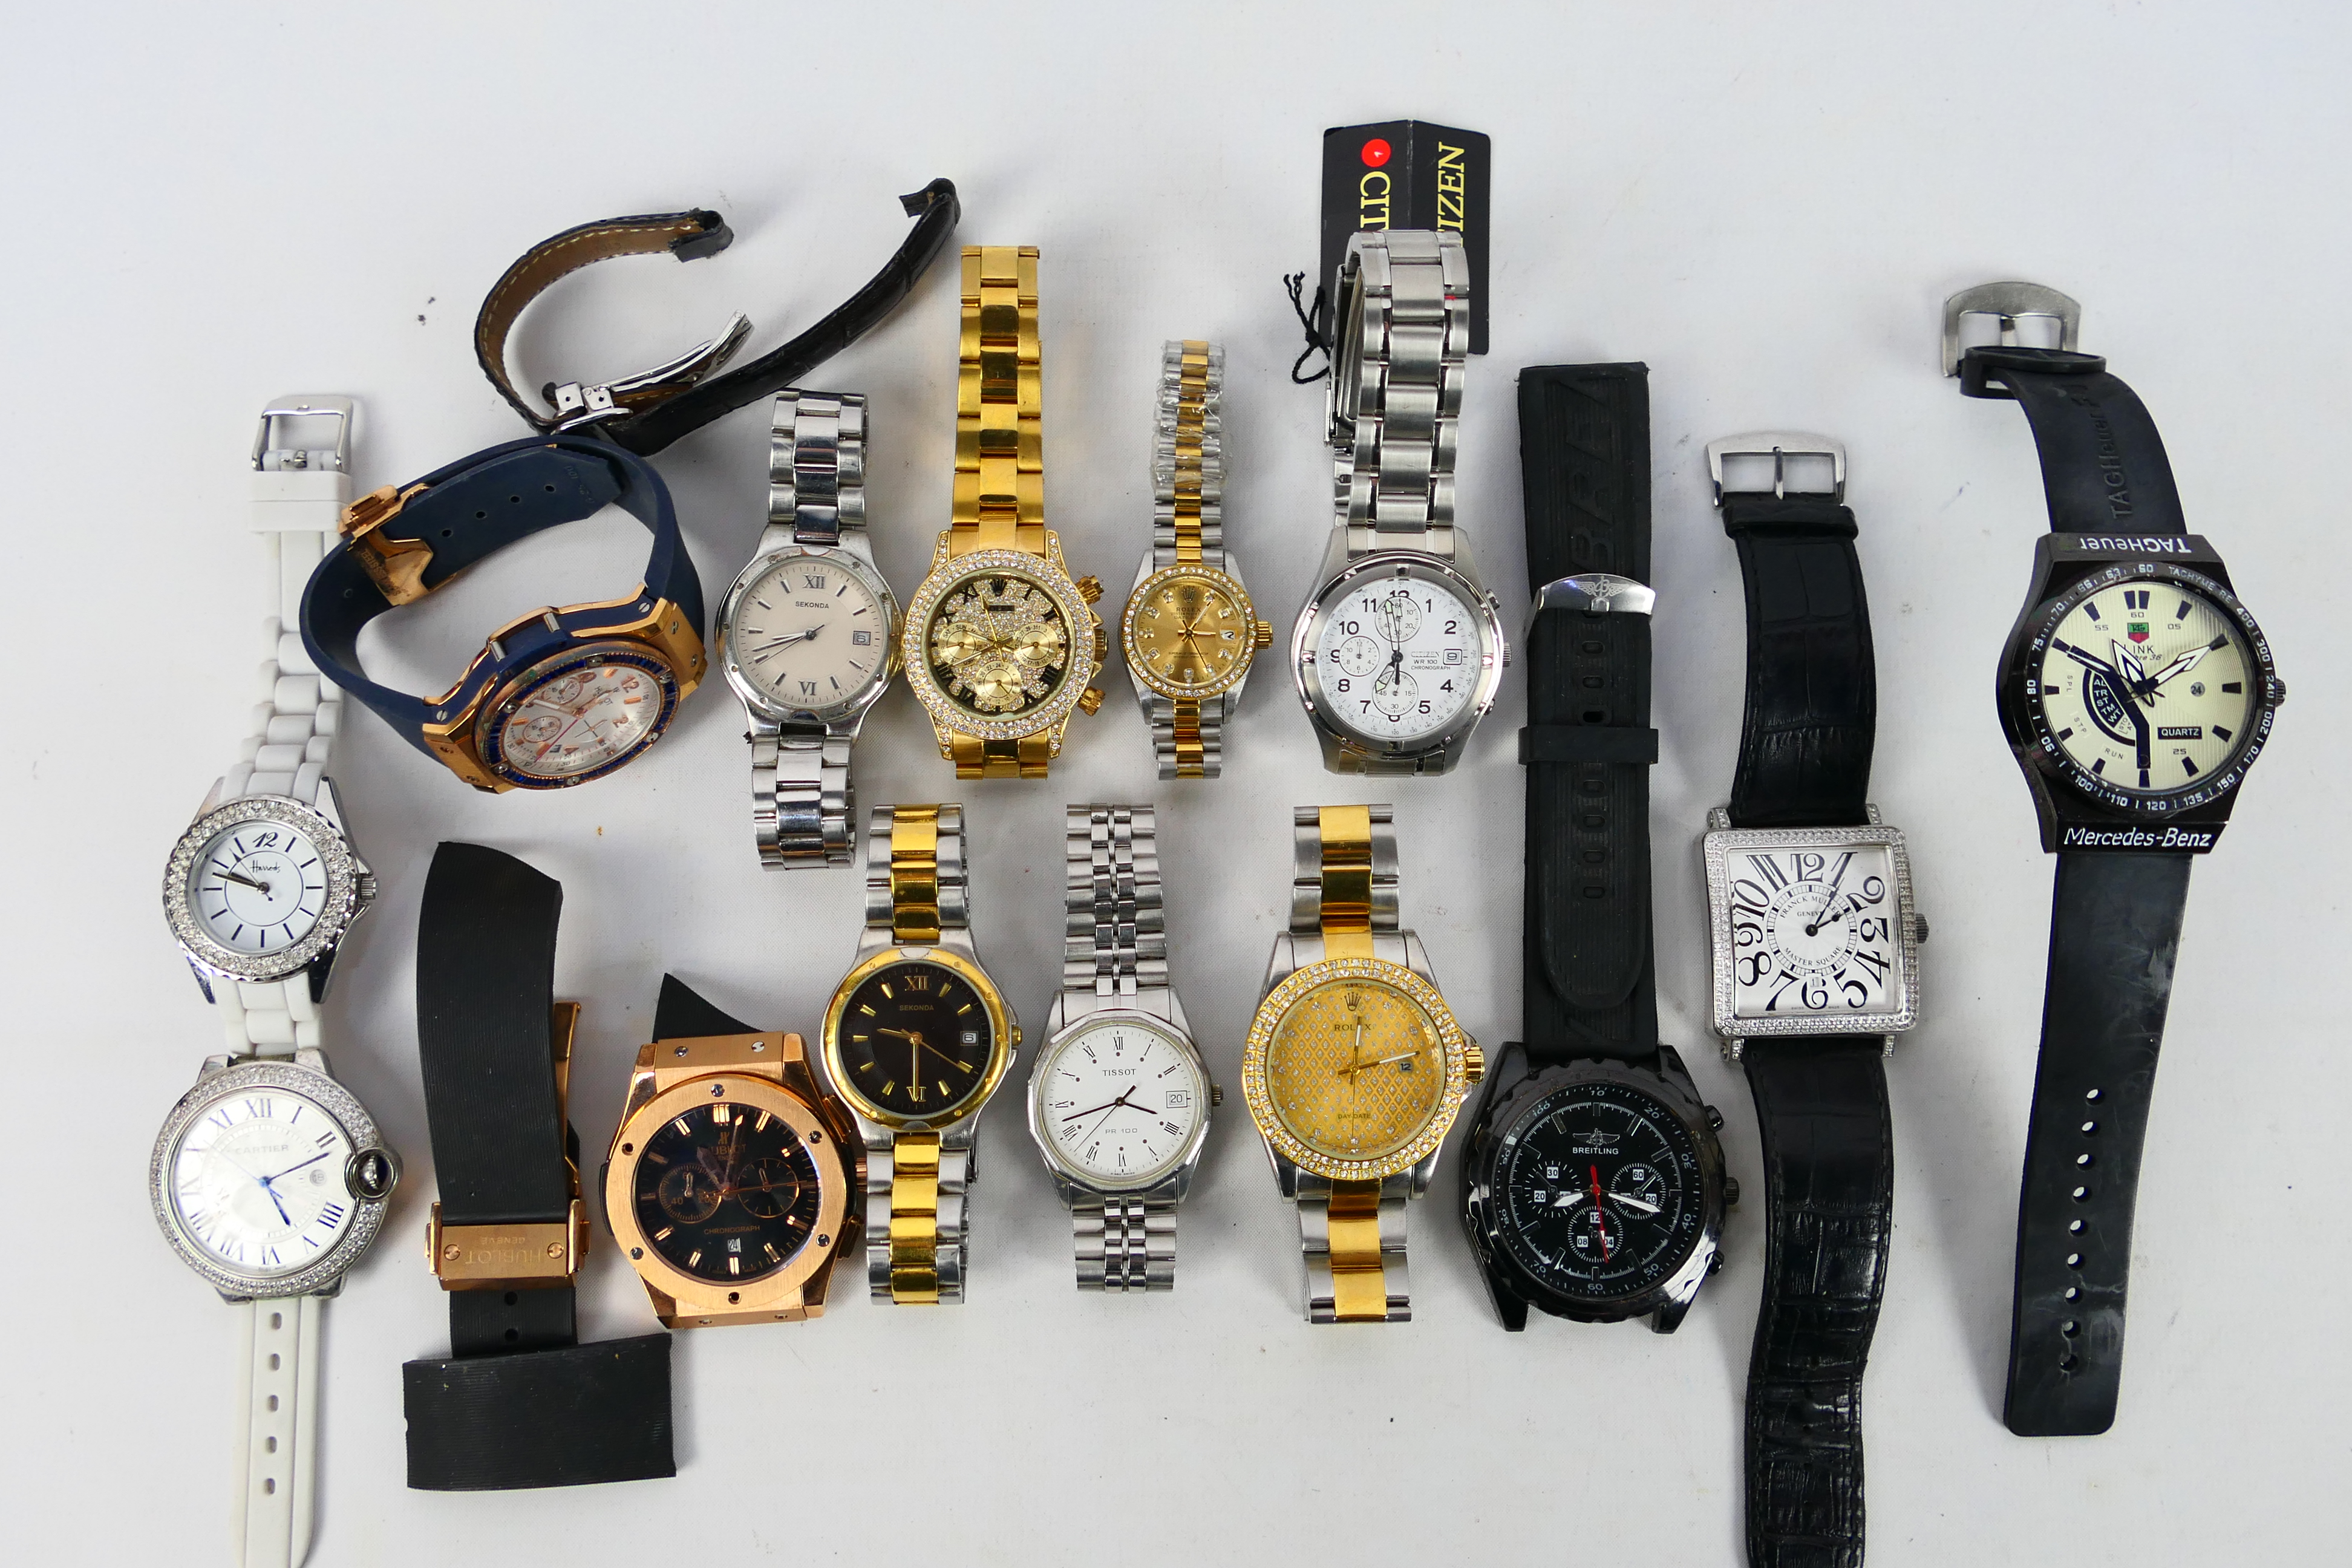 A collection of men's and women's watches to include Sekonda, Tissot, Citizen, and similar.